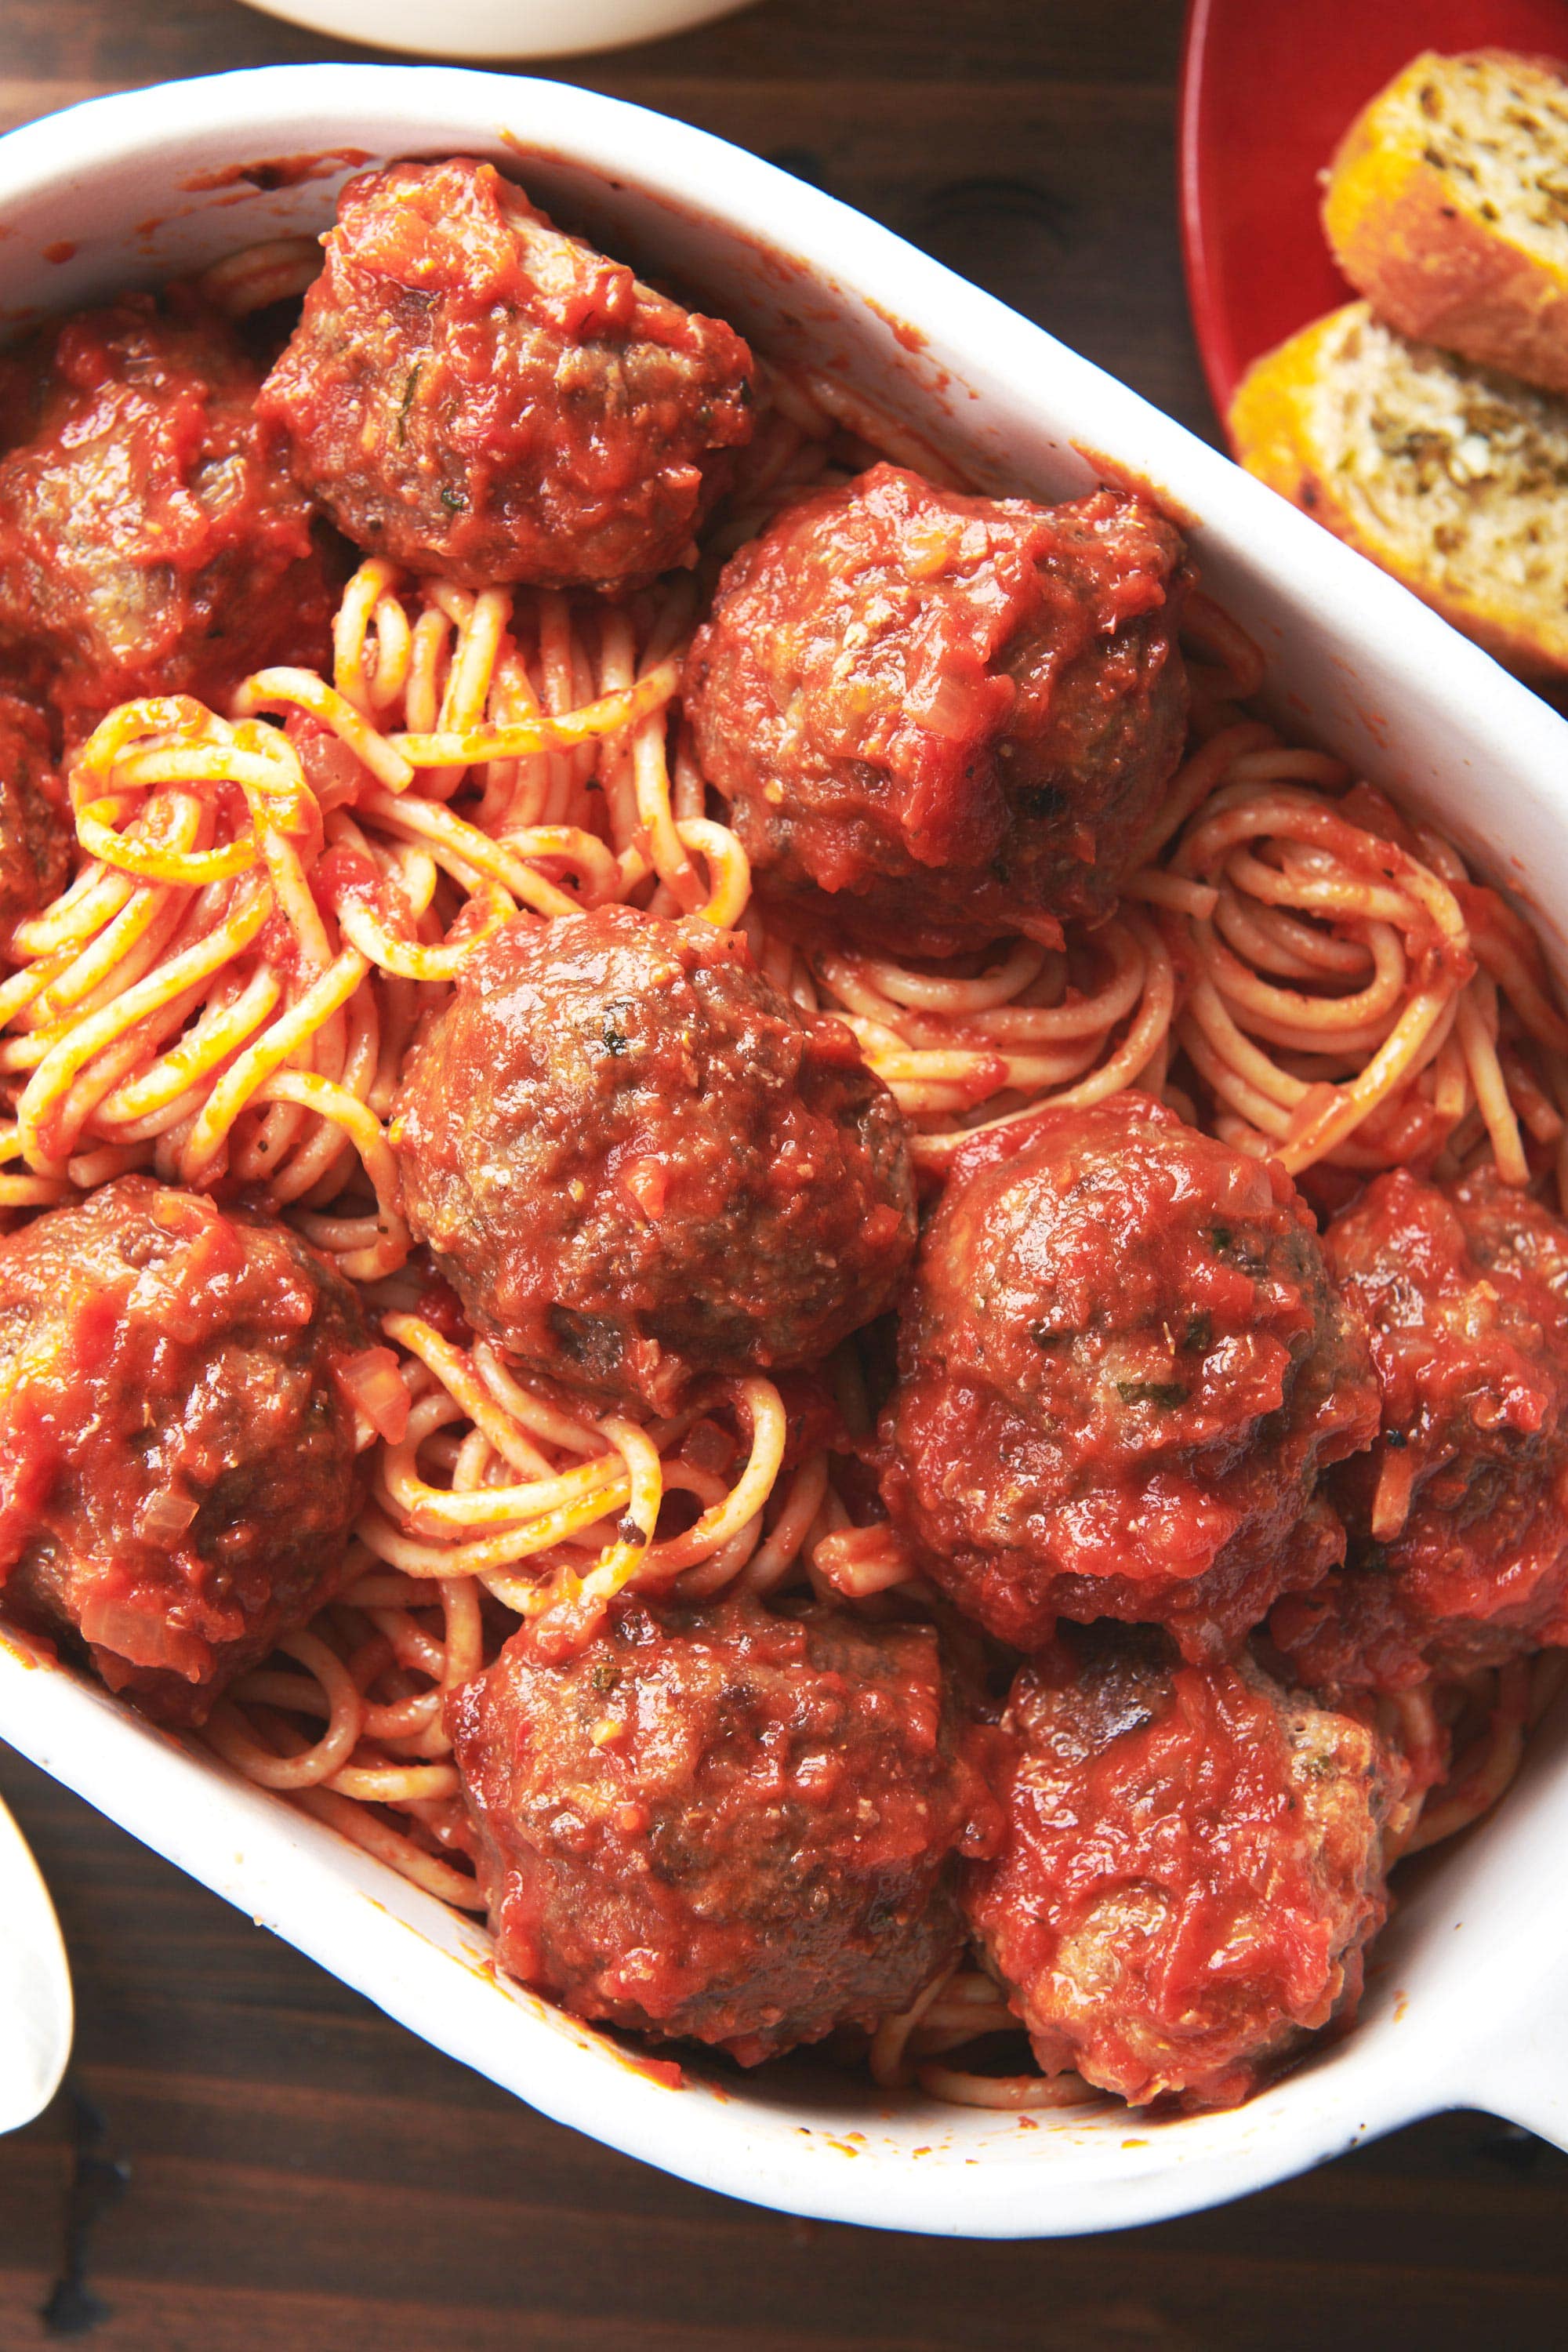 Baking dish of Spaghetti and Meatballs with Tomato Sauce.